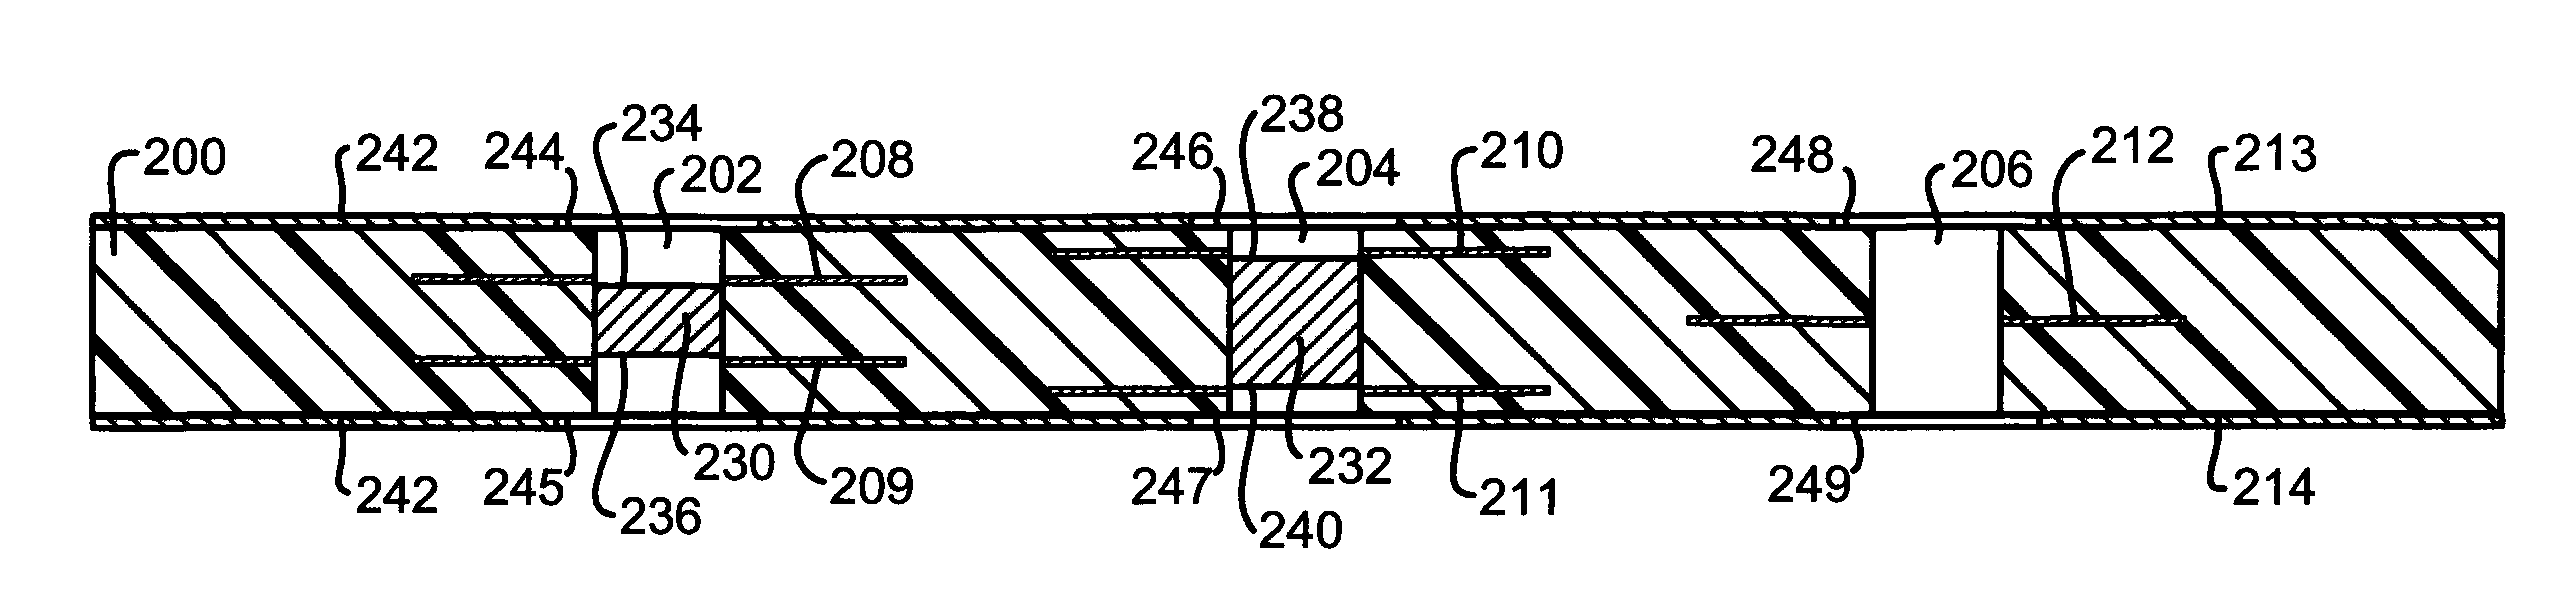 Method of forming a substrate having a plurality of insulator layers